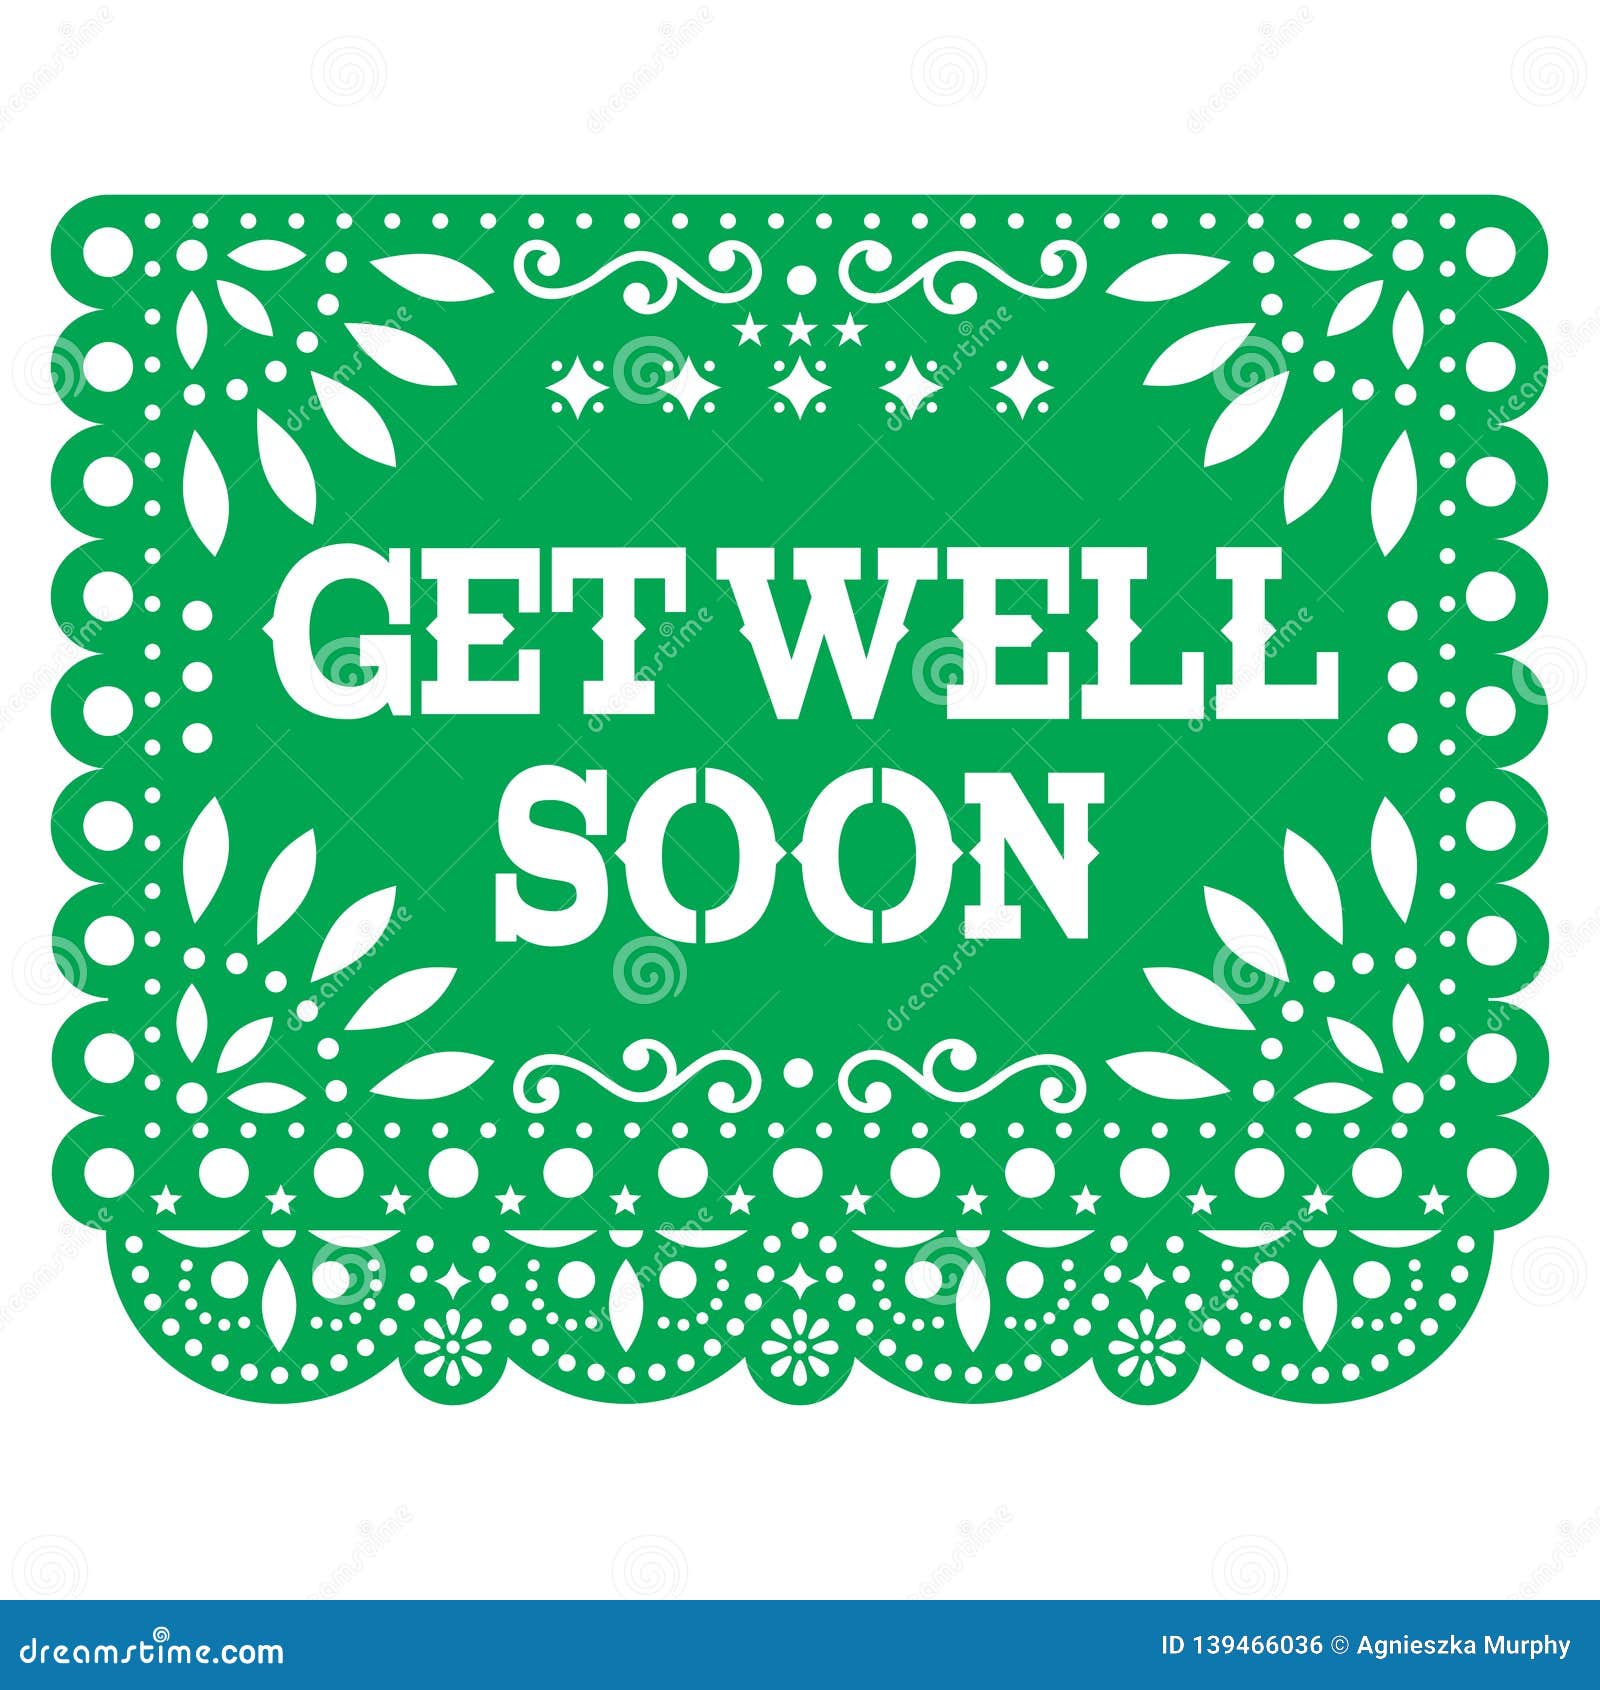 get well soon papel picado greeting card or postcard - mexican green   styled as paper cutout decorations